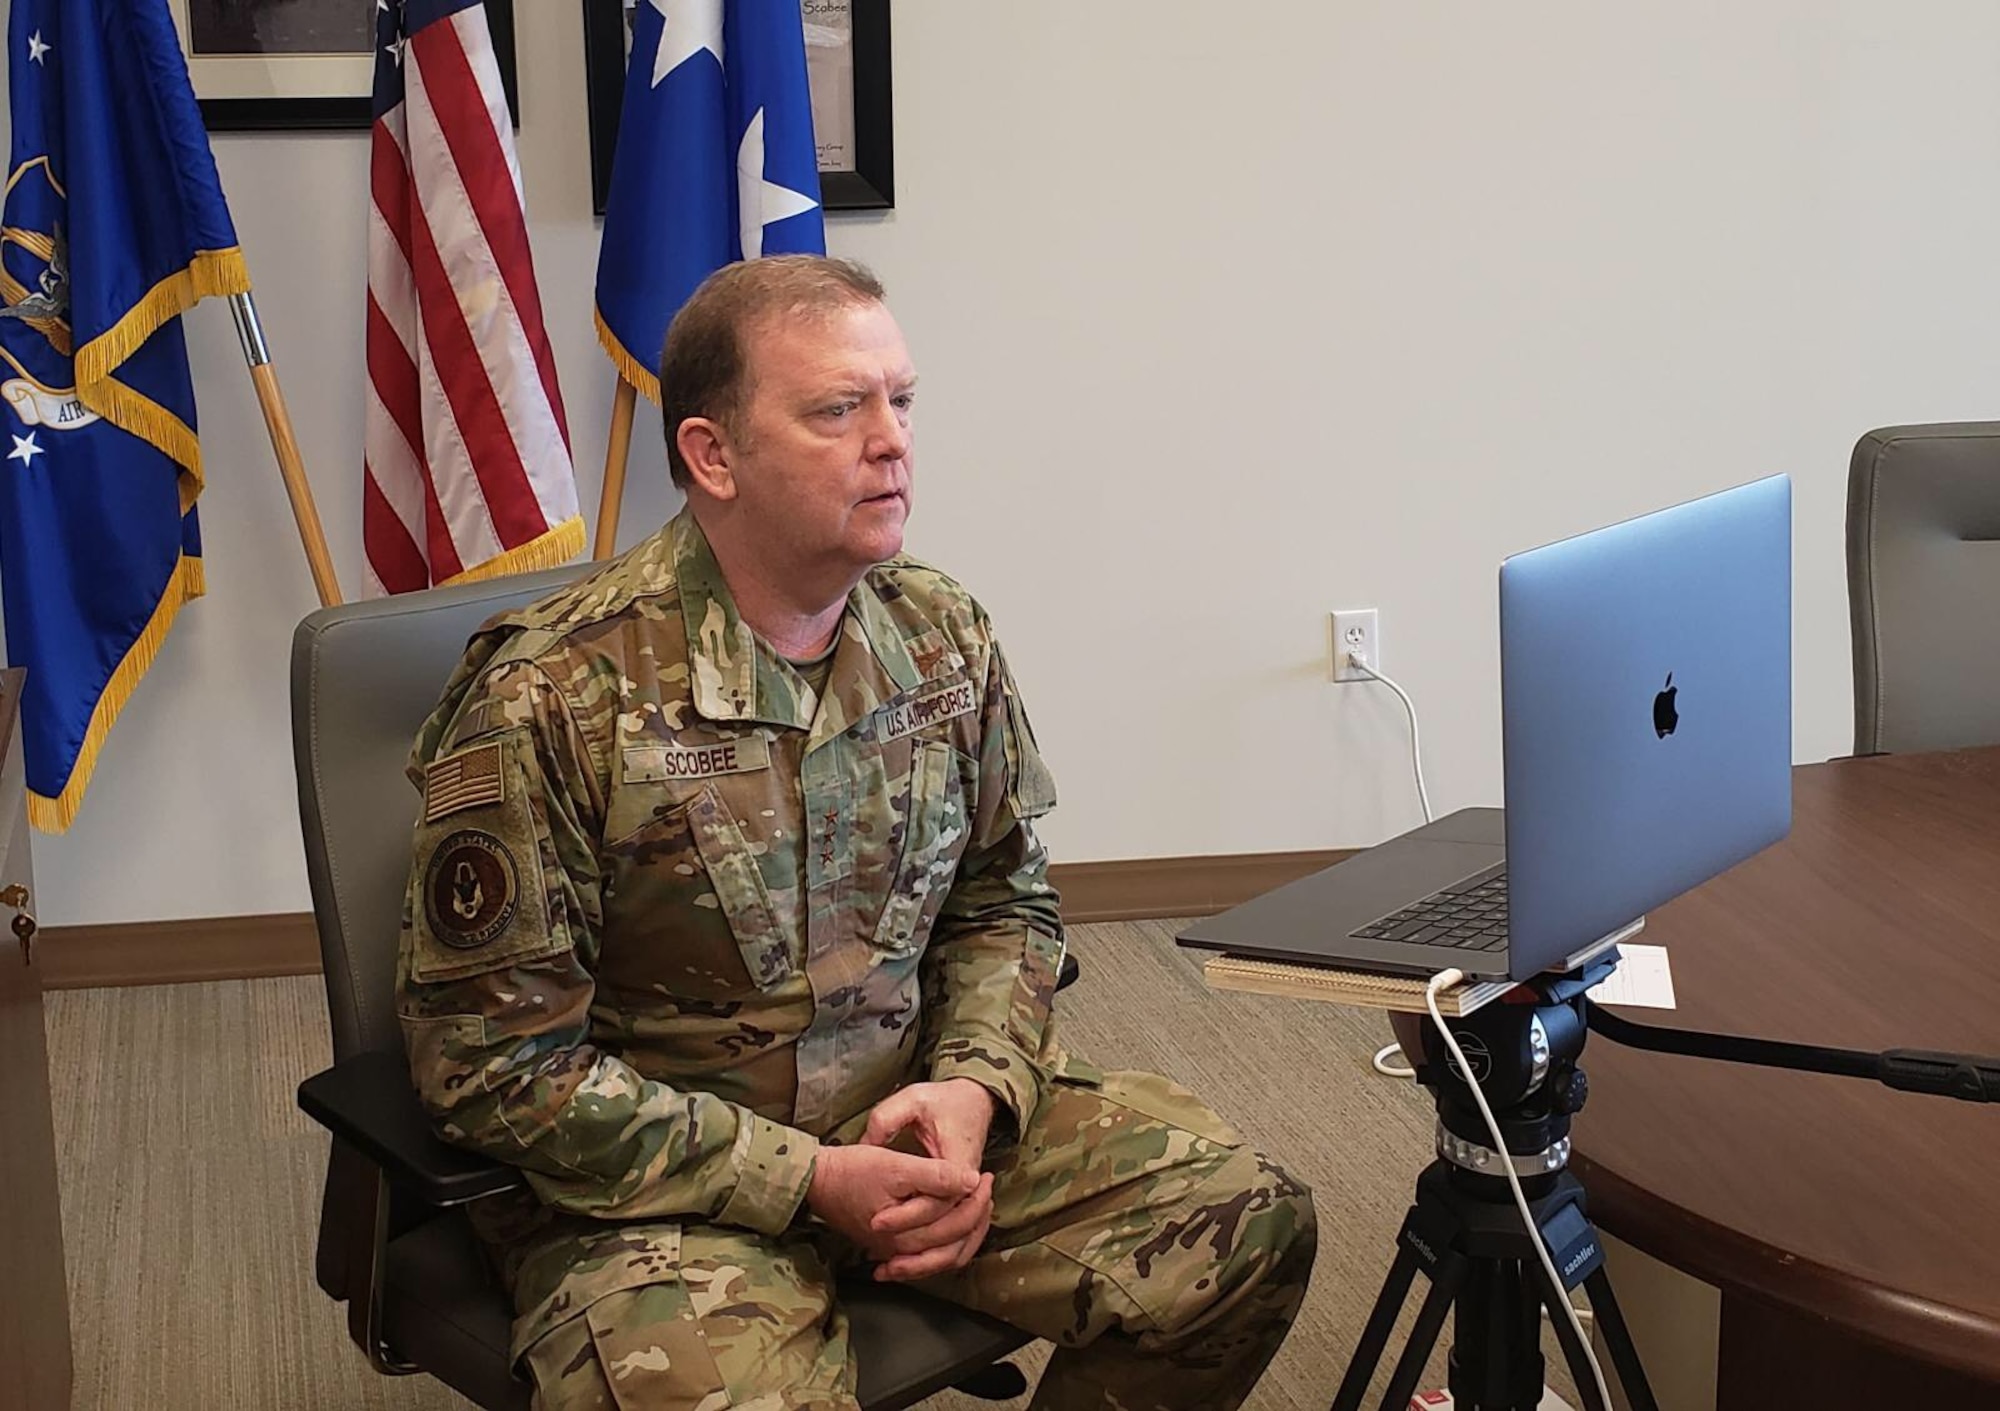 Lt. Gen. Richard Scobee conducts a FaceBook Live town hall meeting from his office to stay in touch with Reserve Citizen Airmen during this time of physical distancing. (Lt. Col. Jon Quinlan)